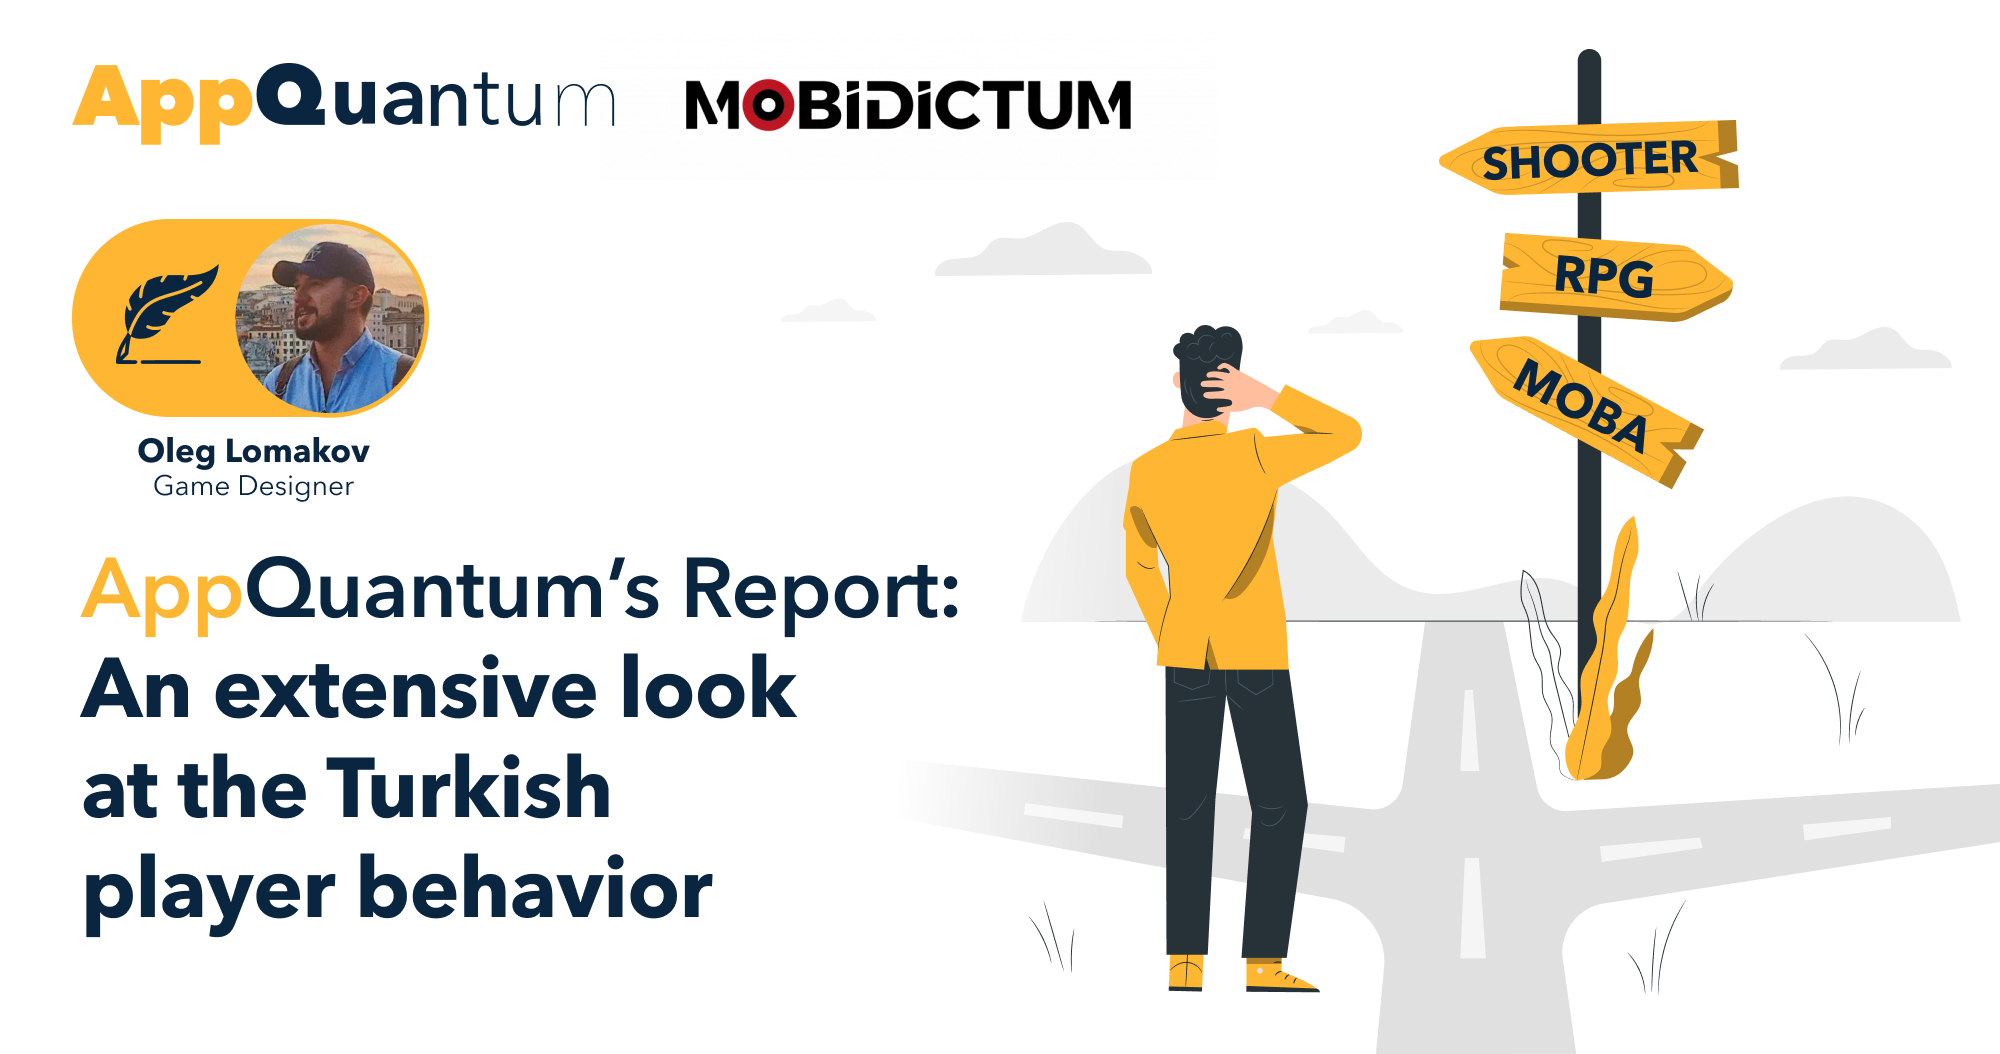 AppQuantum’s Report for Mobidictum: An Extensive Look at the Turkish Player Behavior